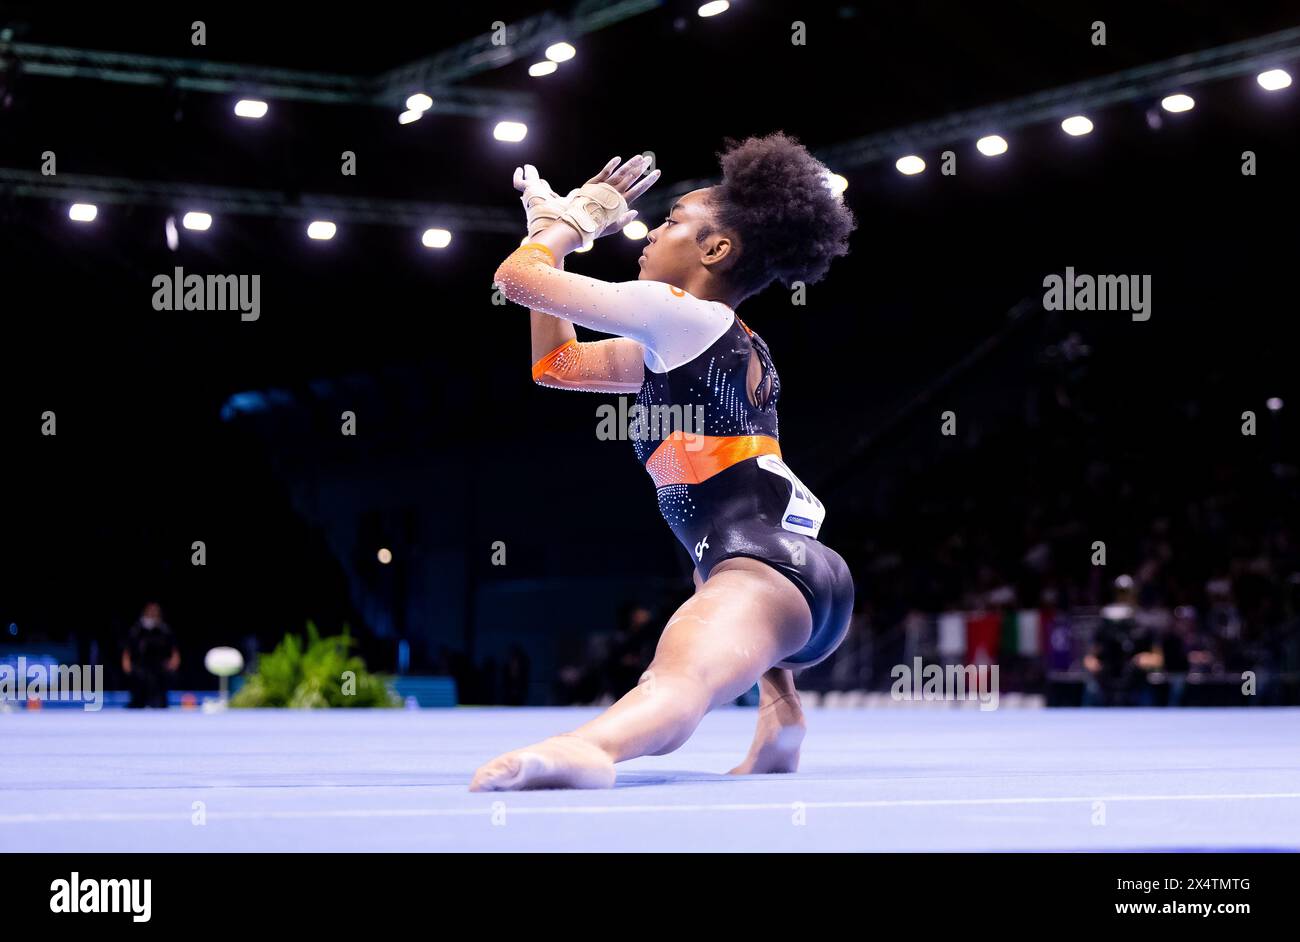 Rimini, Italy. 5th May 2024. RIMINI - Jaylee Chukwu (NED) in action during the junior event final on floor at the European Gymnastics Championships in the Fiera di Rimini  Alamy / Iris van den Broek Credit: Iris van den Broek/Alamy Live News Stock Photo